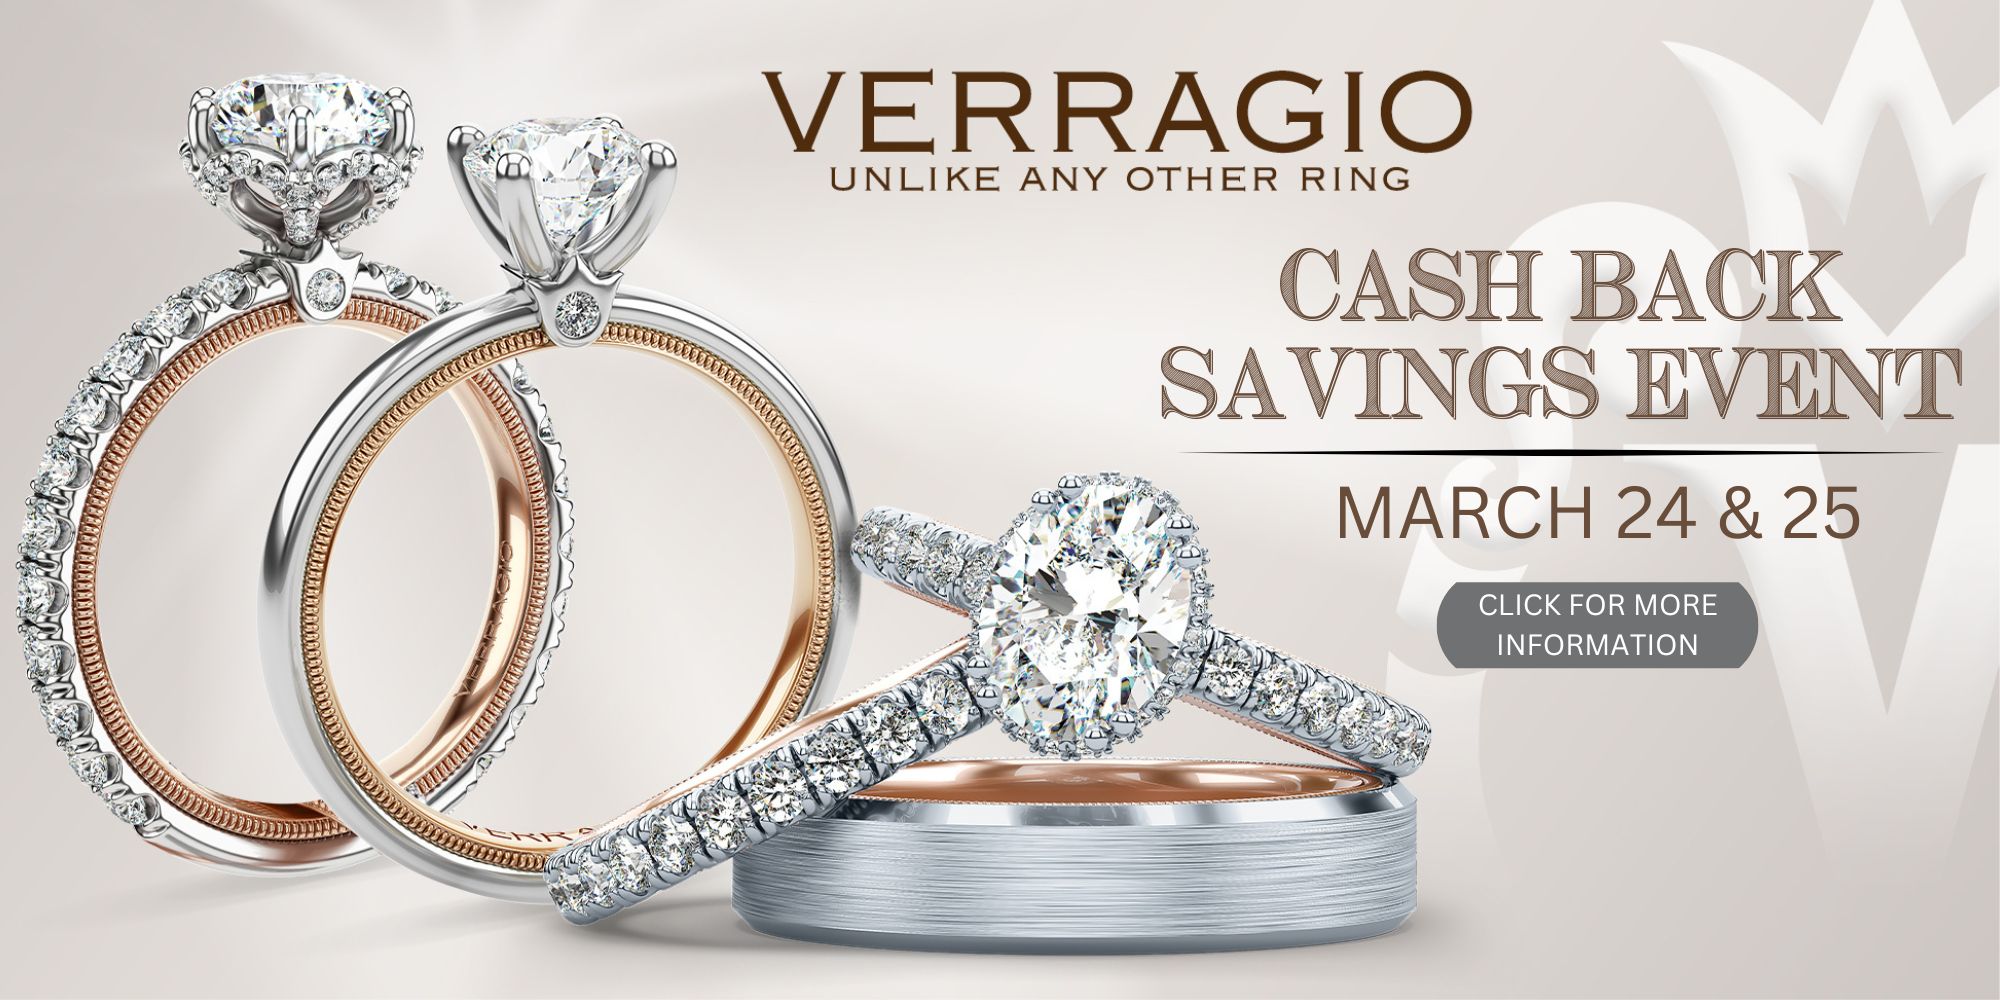 Cash Back Savings with Verragio at Adlers Jewelers